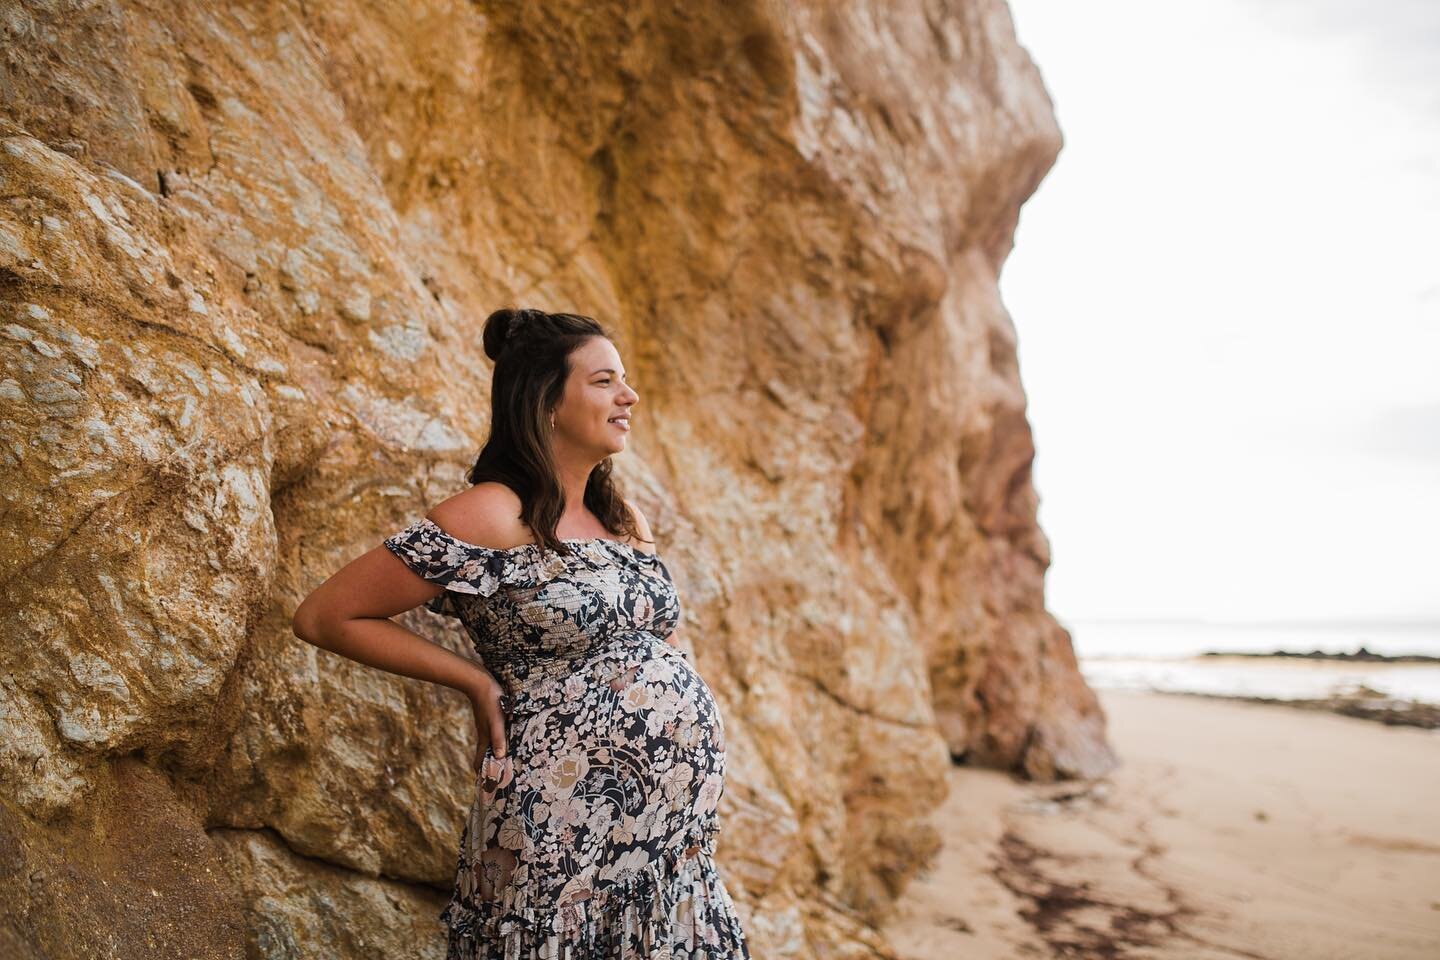 There was a fair bit to focus the lens on with this crew- mostly little Miss Tilly, who commanded the camera from the get go, but during her breaks from being our muse we were able to squeeze a few maternity shots of her radiant Mama in too &hearts;